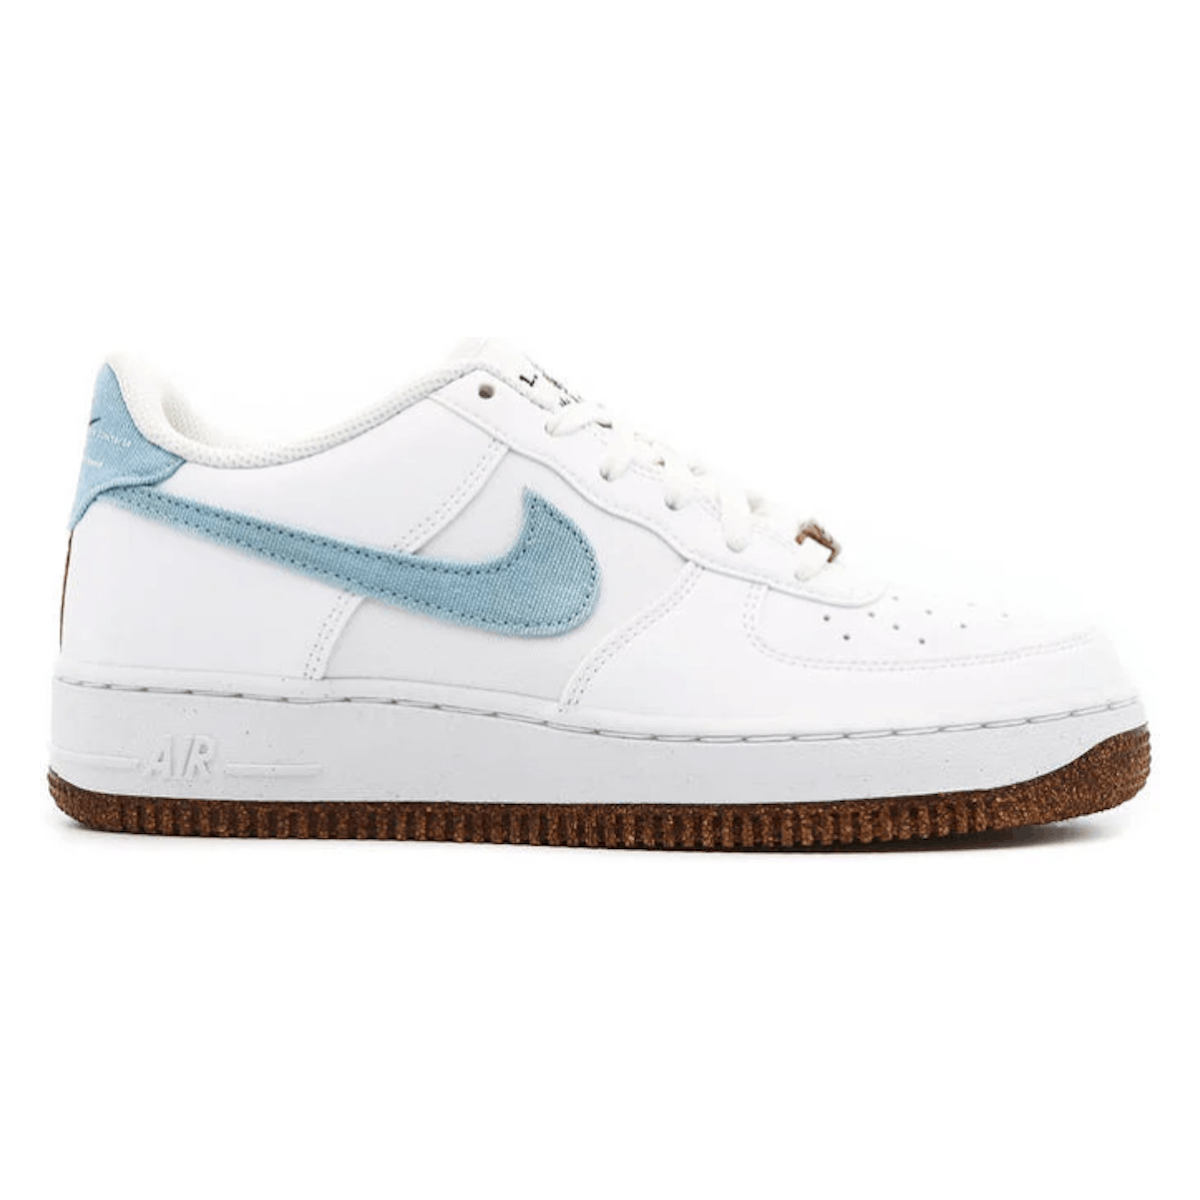 Nike Air Force 1 Low LV8 GS "White"